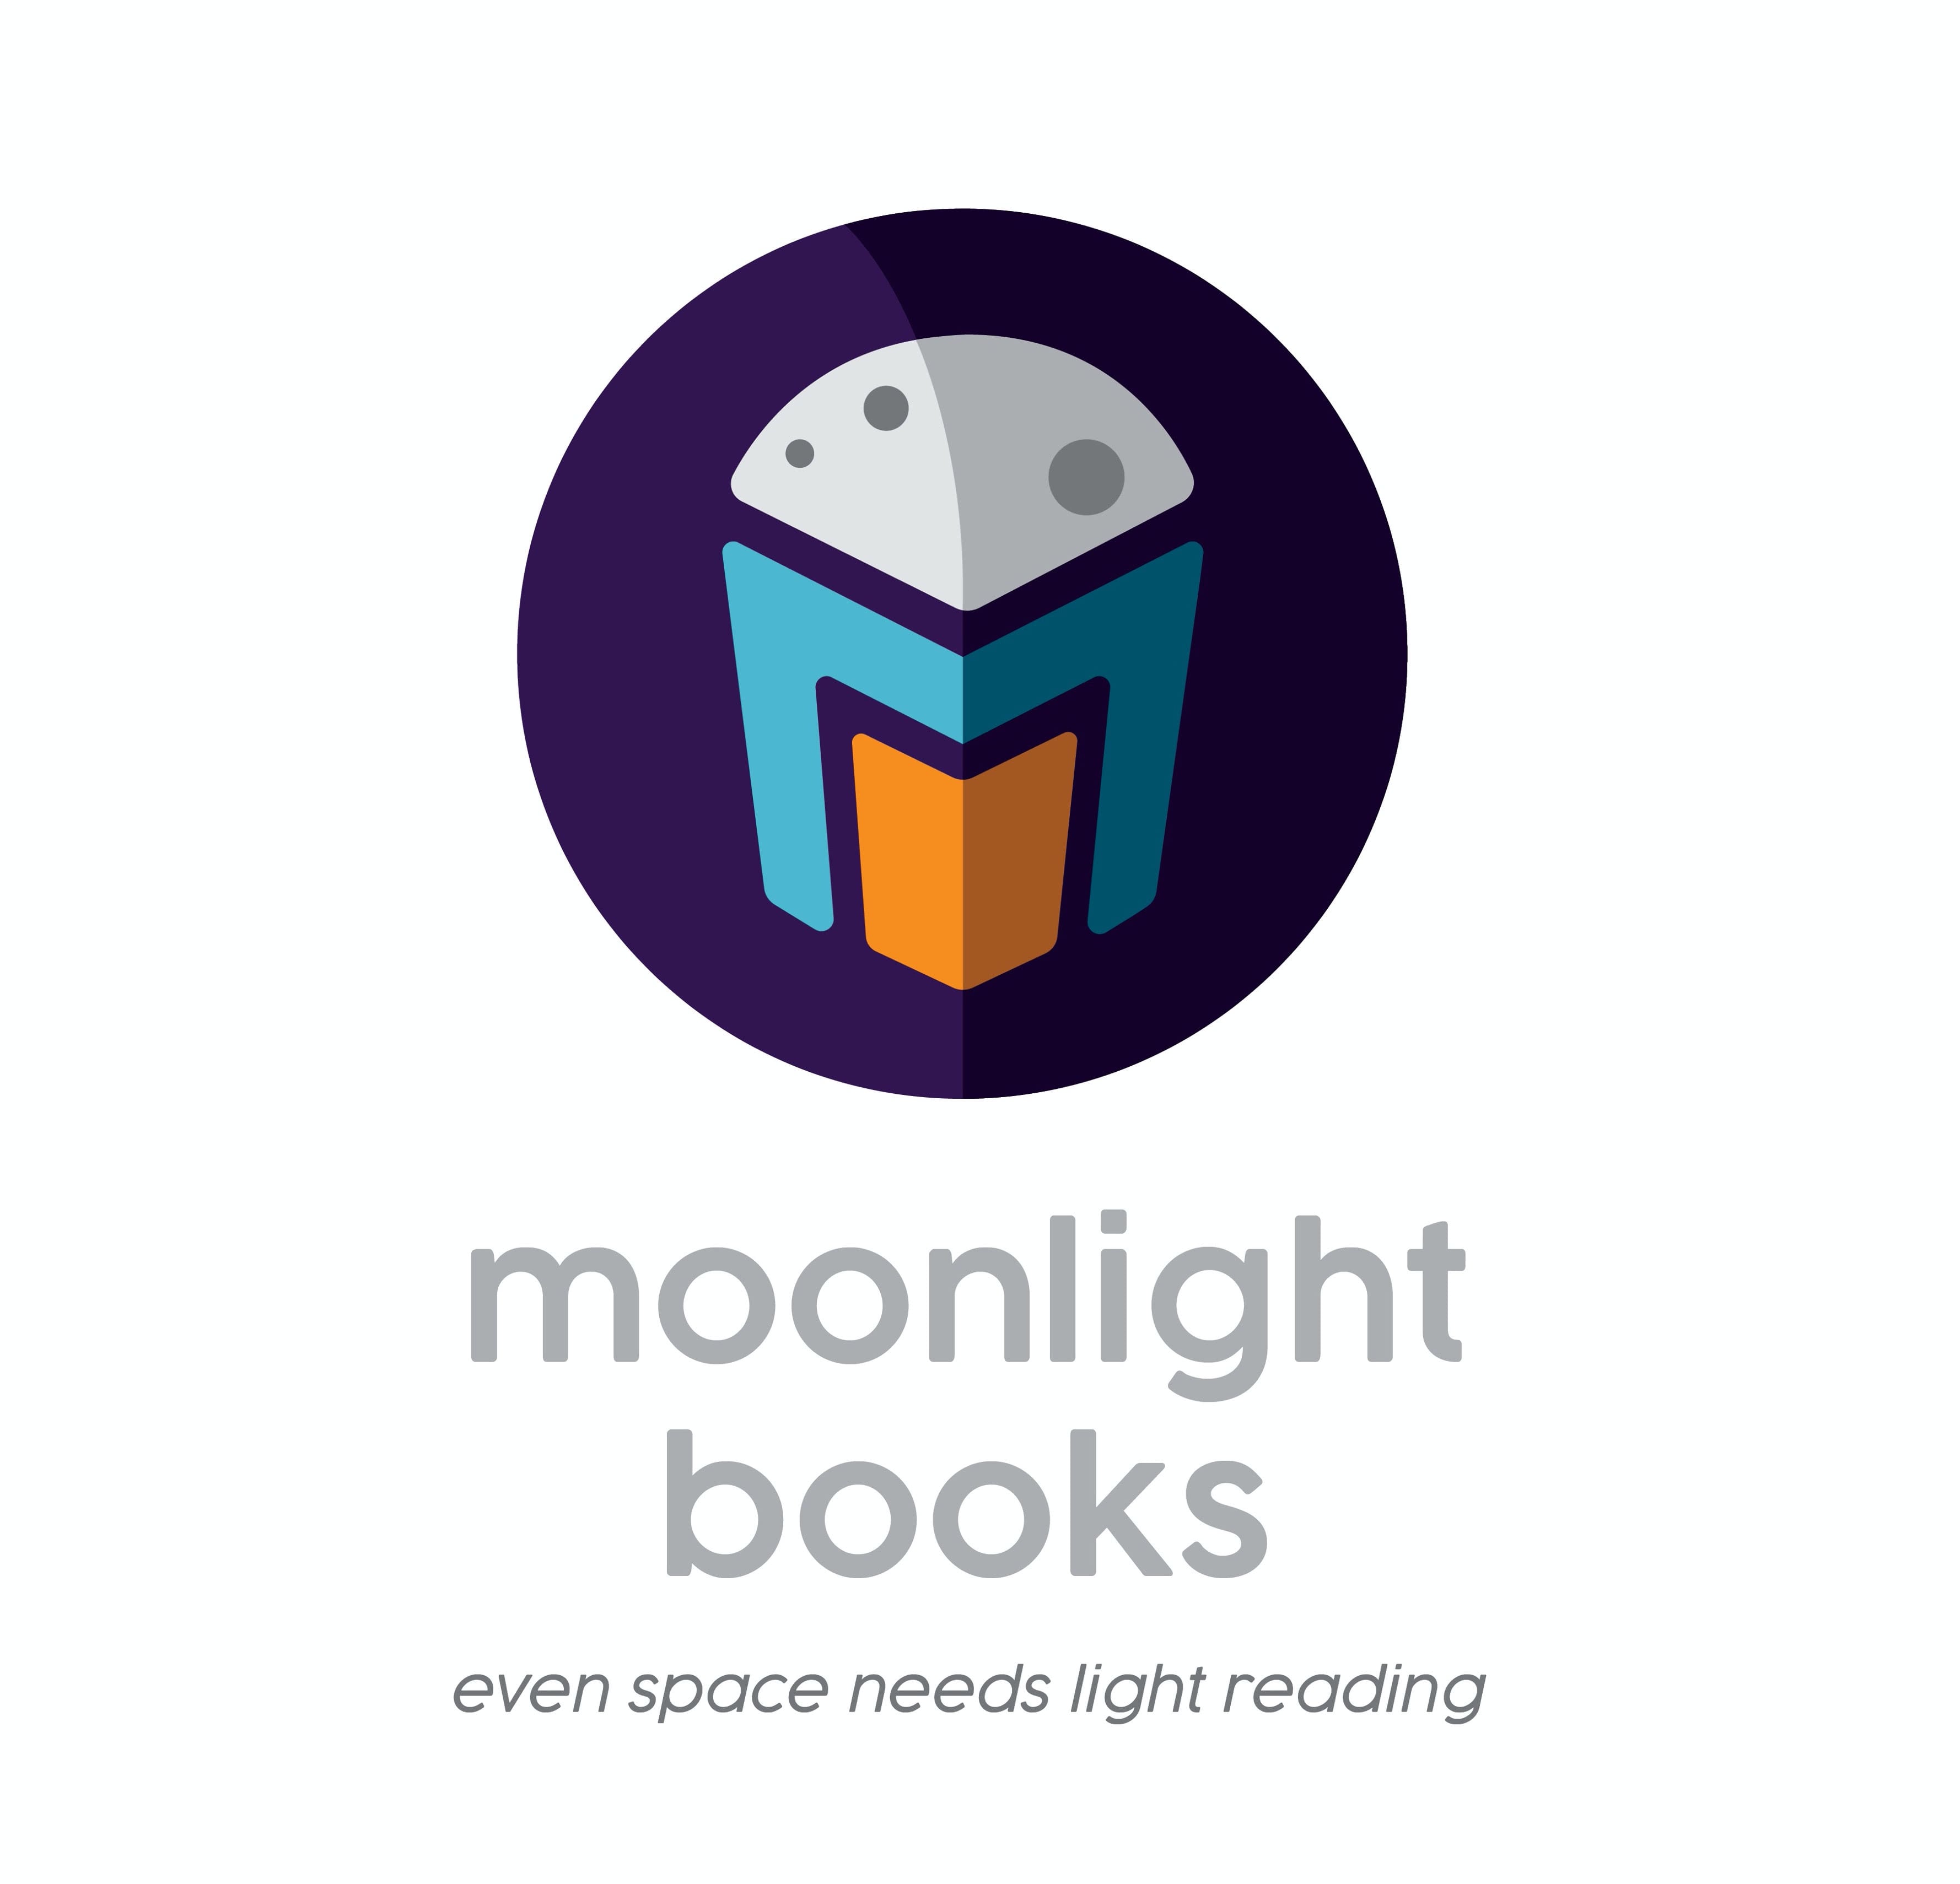 ADDY award winner Karina Cavett's logo, Moonlight Books, is a graphic of the moon peaking over a little bookstore, it also looks like the moon is reading